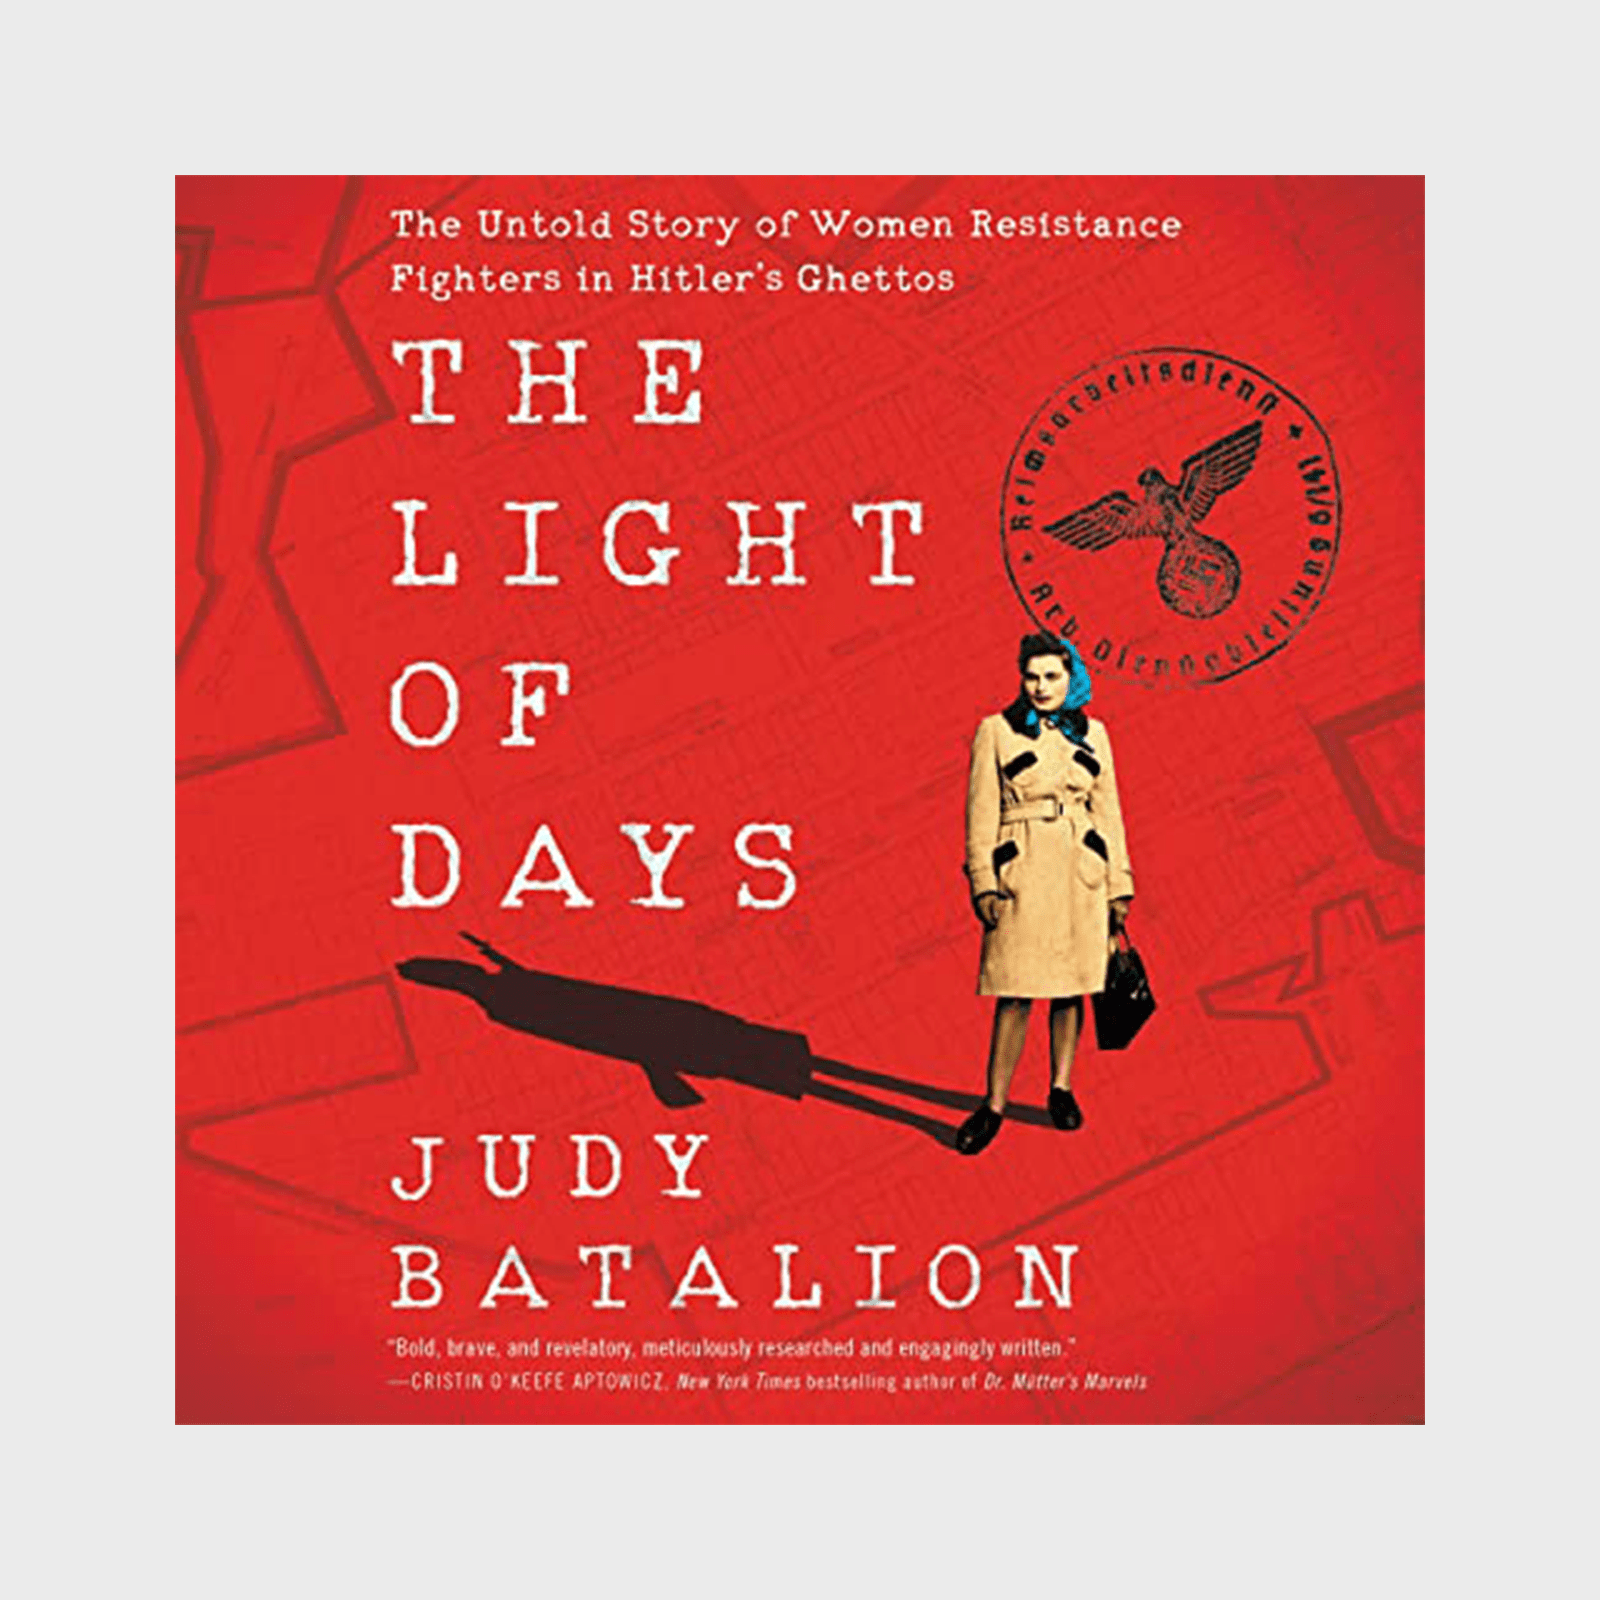 <h3><strong><em>The Light of Days </em>by Judy Batalion</strong></h3> <p>Looking for stories about some of the bravest women to have ever lived? Look no further than this powerful and enlightening tale of the Jewish women who became resistance fighters during World War II. Their stories haven't been told often, but thanks to <em><a href="https://www.amazon.com/Light-Days-Resistance-Fighters-Hitlers/dp/B07ZPGV1CG" rel="noopener noreferrer">The Light of Days</a></em>, which was written by the granddaughter of Polish Holocaust survivors and has already been optioned by Steven Spielberg for a major motion picture, their bravery will live on.</p> <p class="listicle-page__cta-button-shop"><a class="shop-btn" href="https://www.amazon.com/Light-Days-Resistance-Fighters-Hitlers/dp/B07ZPGV1CG">Shop Now</a></p>